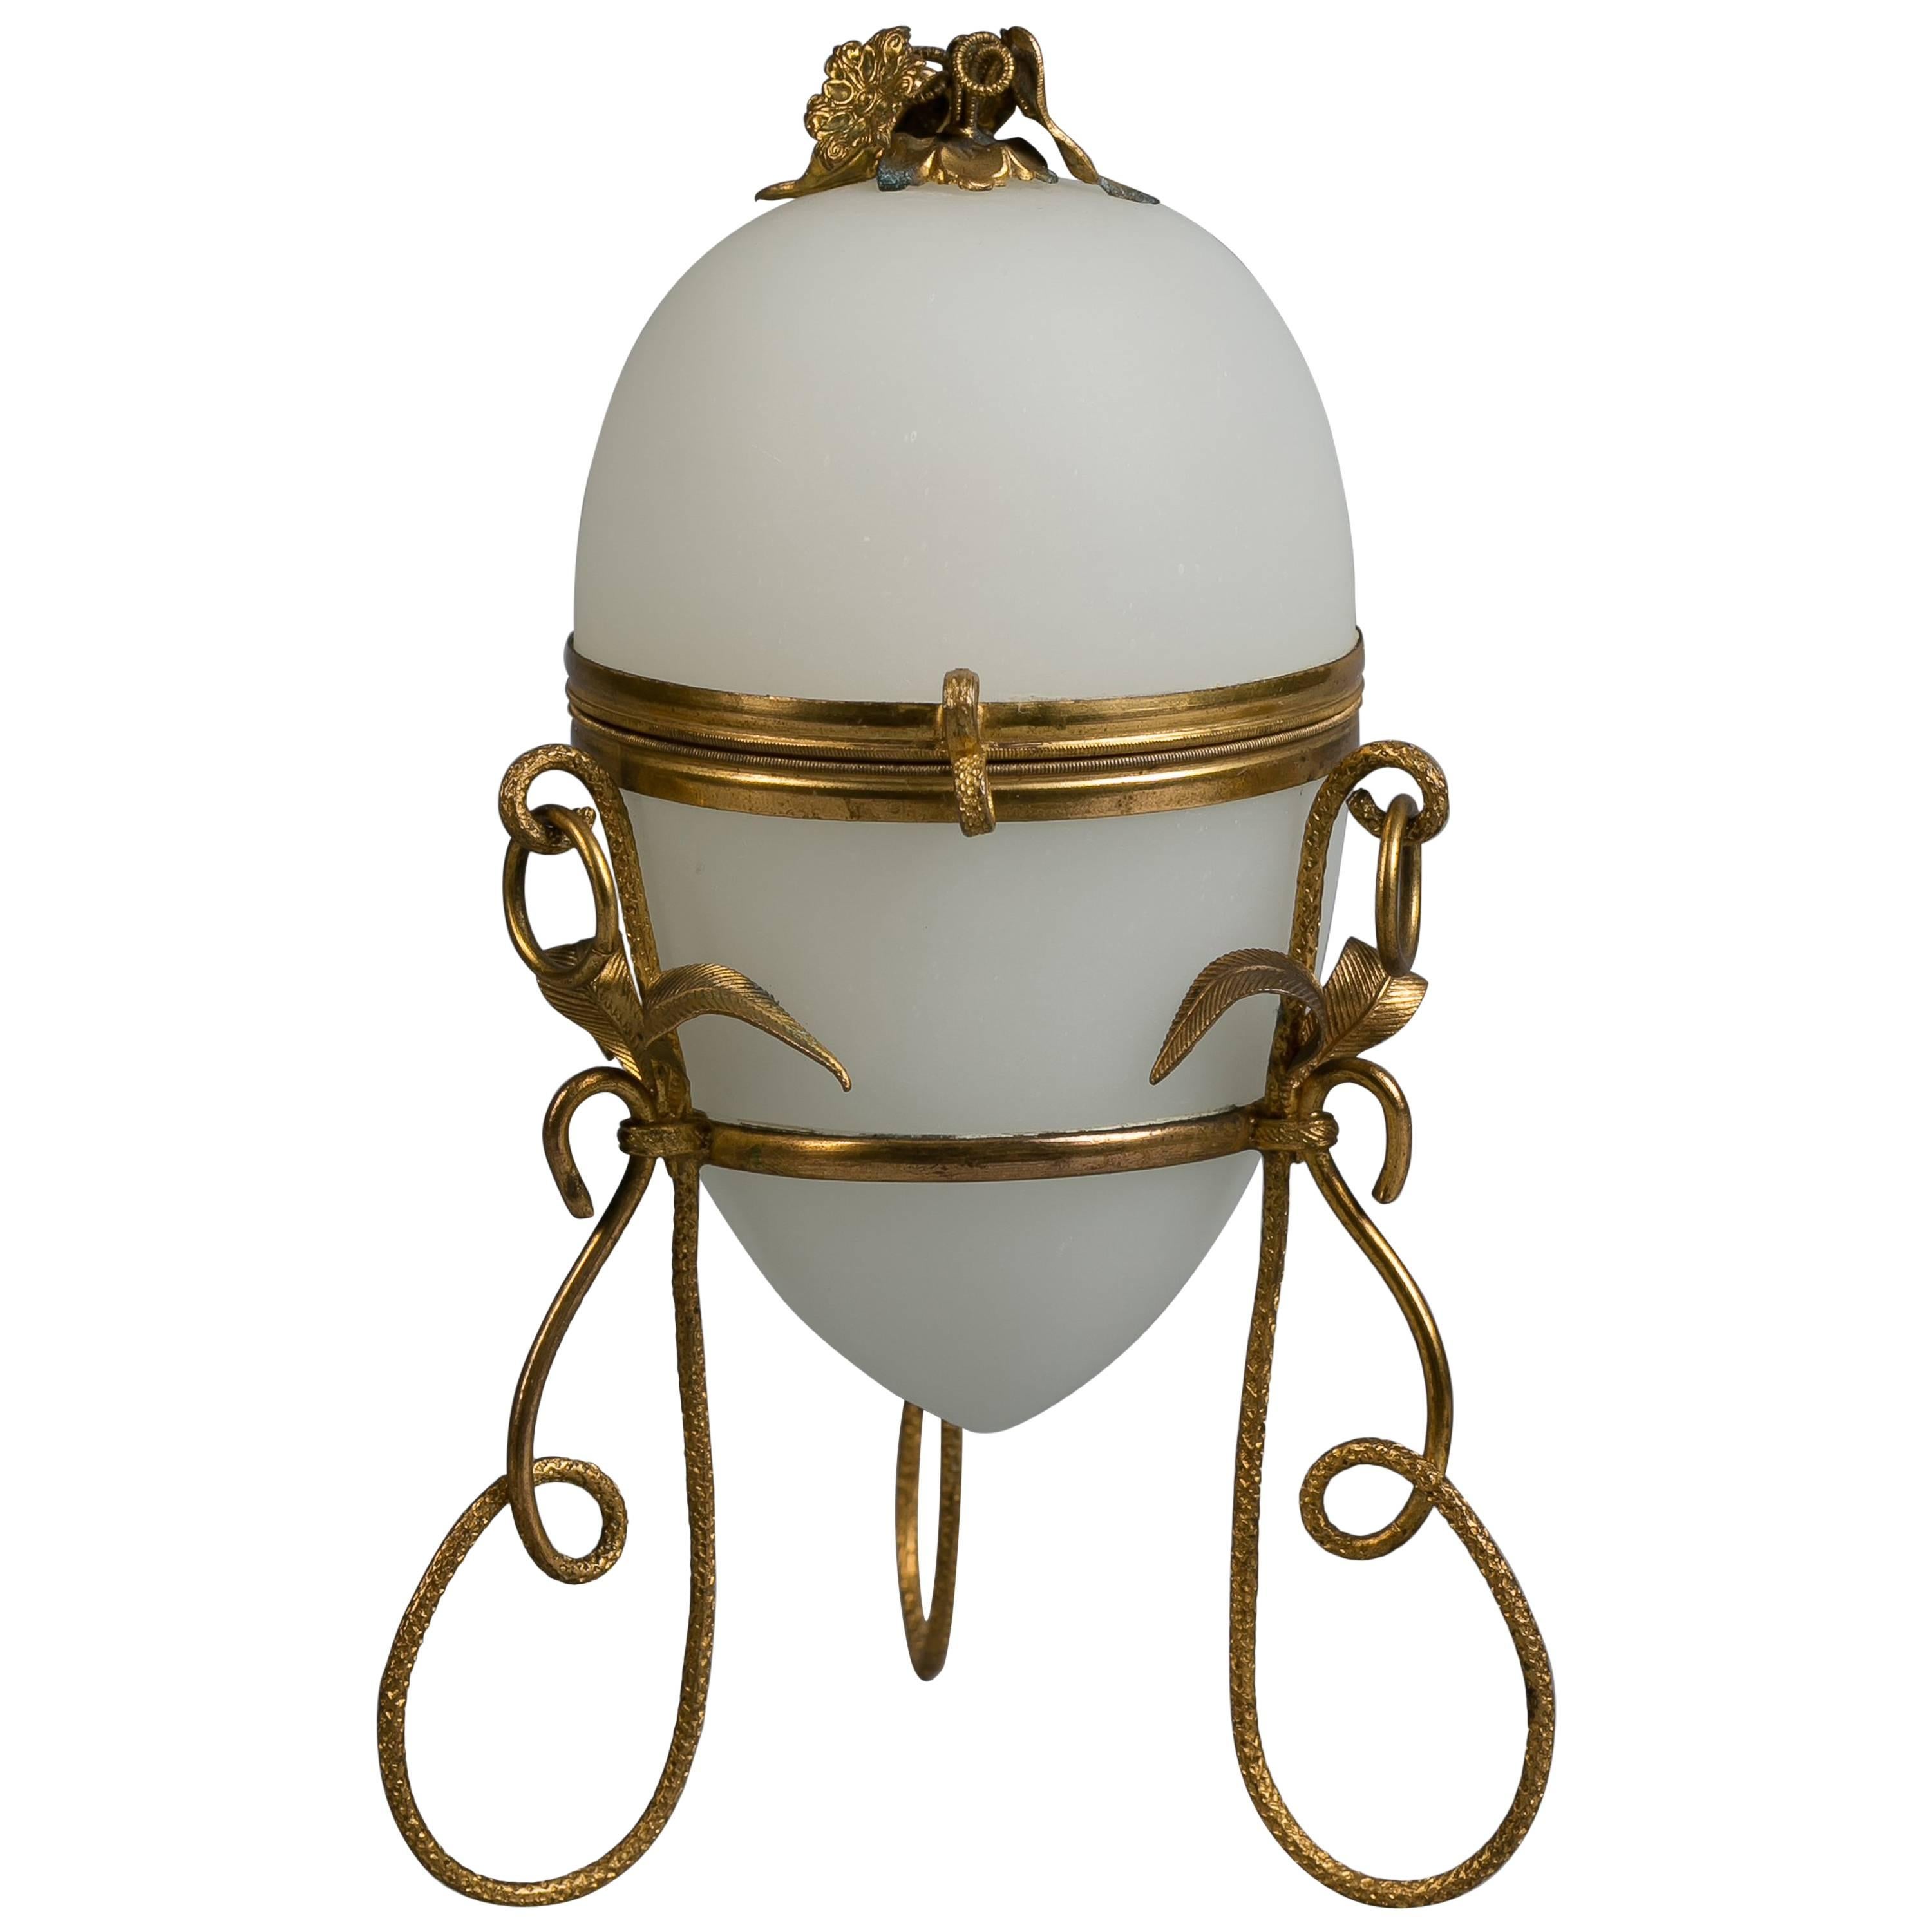 French Opaline Glass Egg Shaped Container with Perfume Bottle, circa 1890